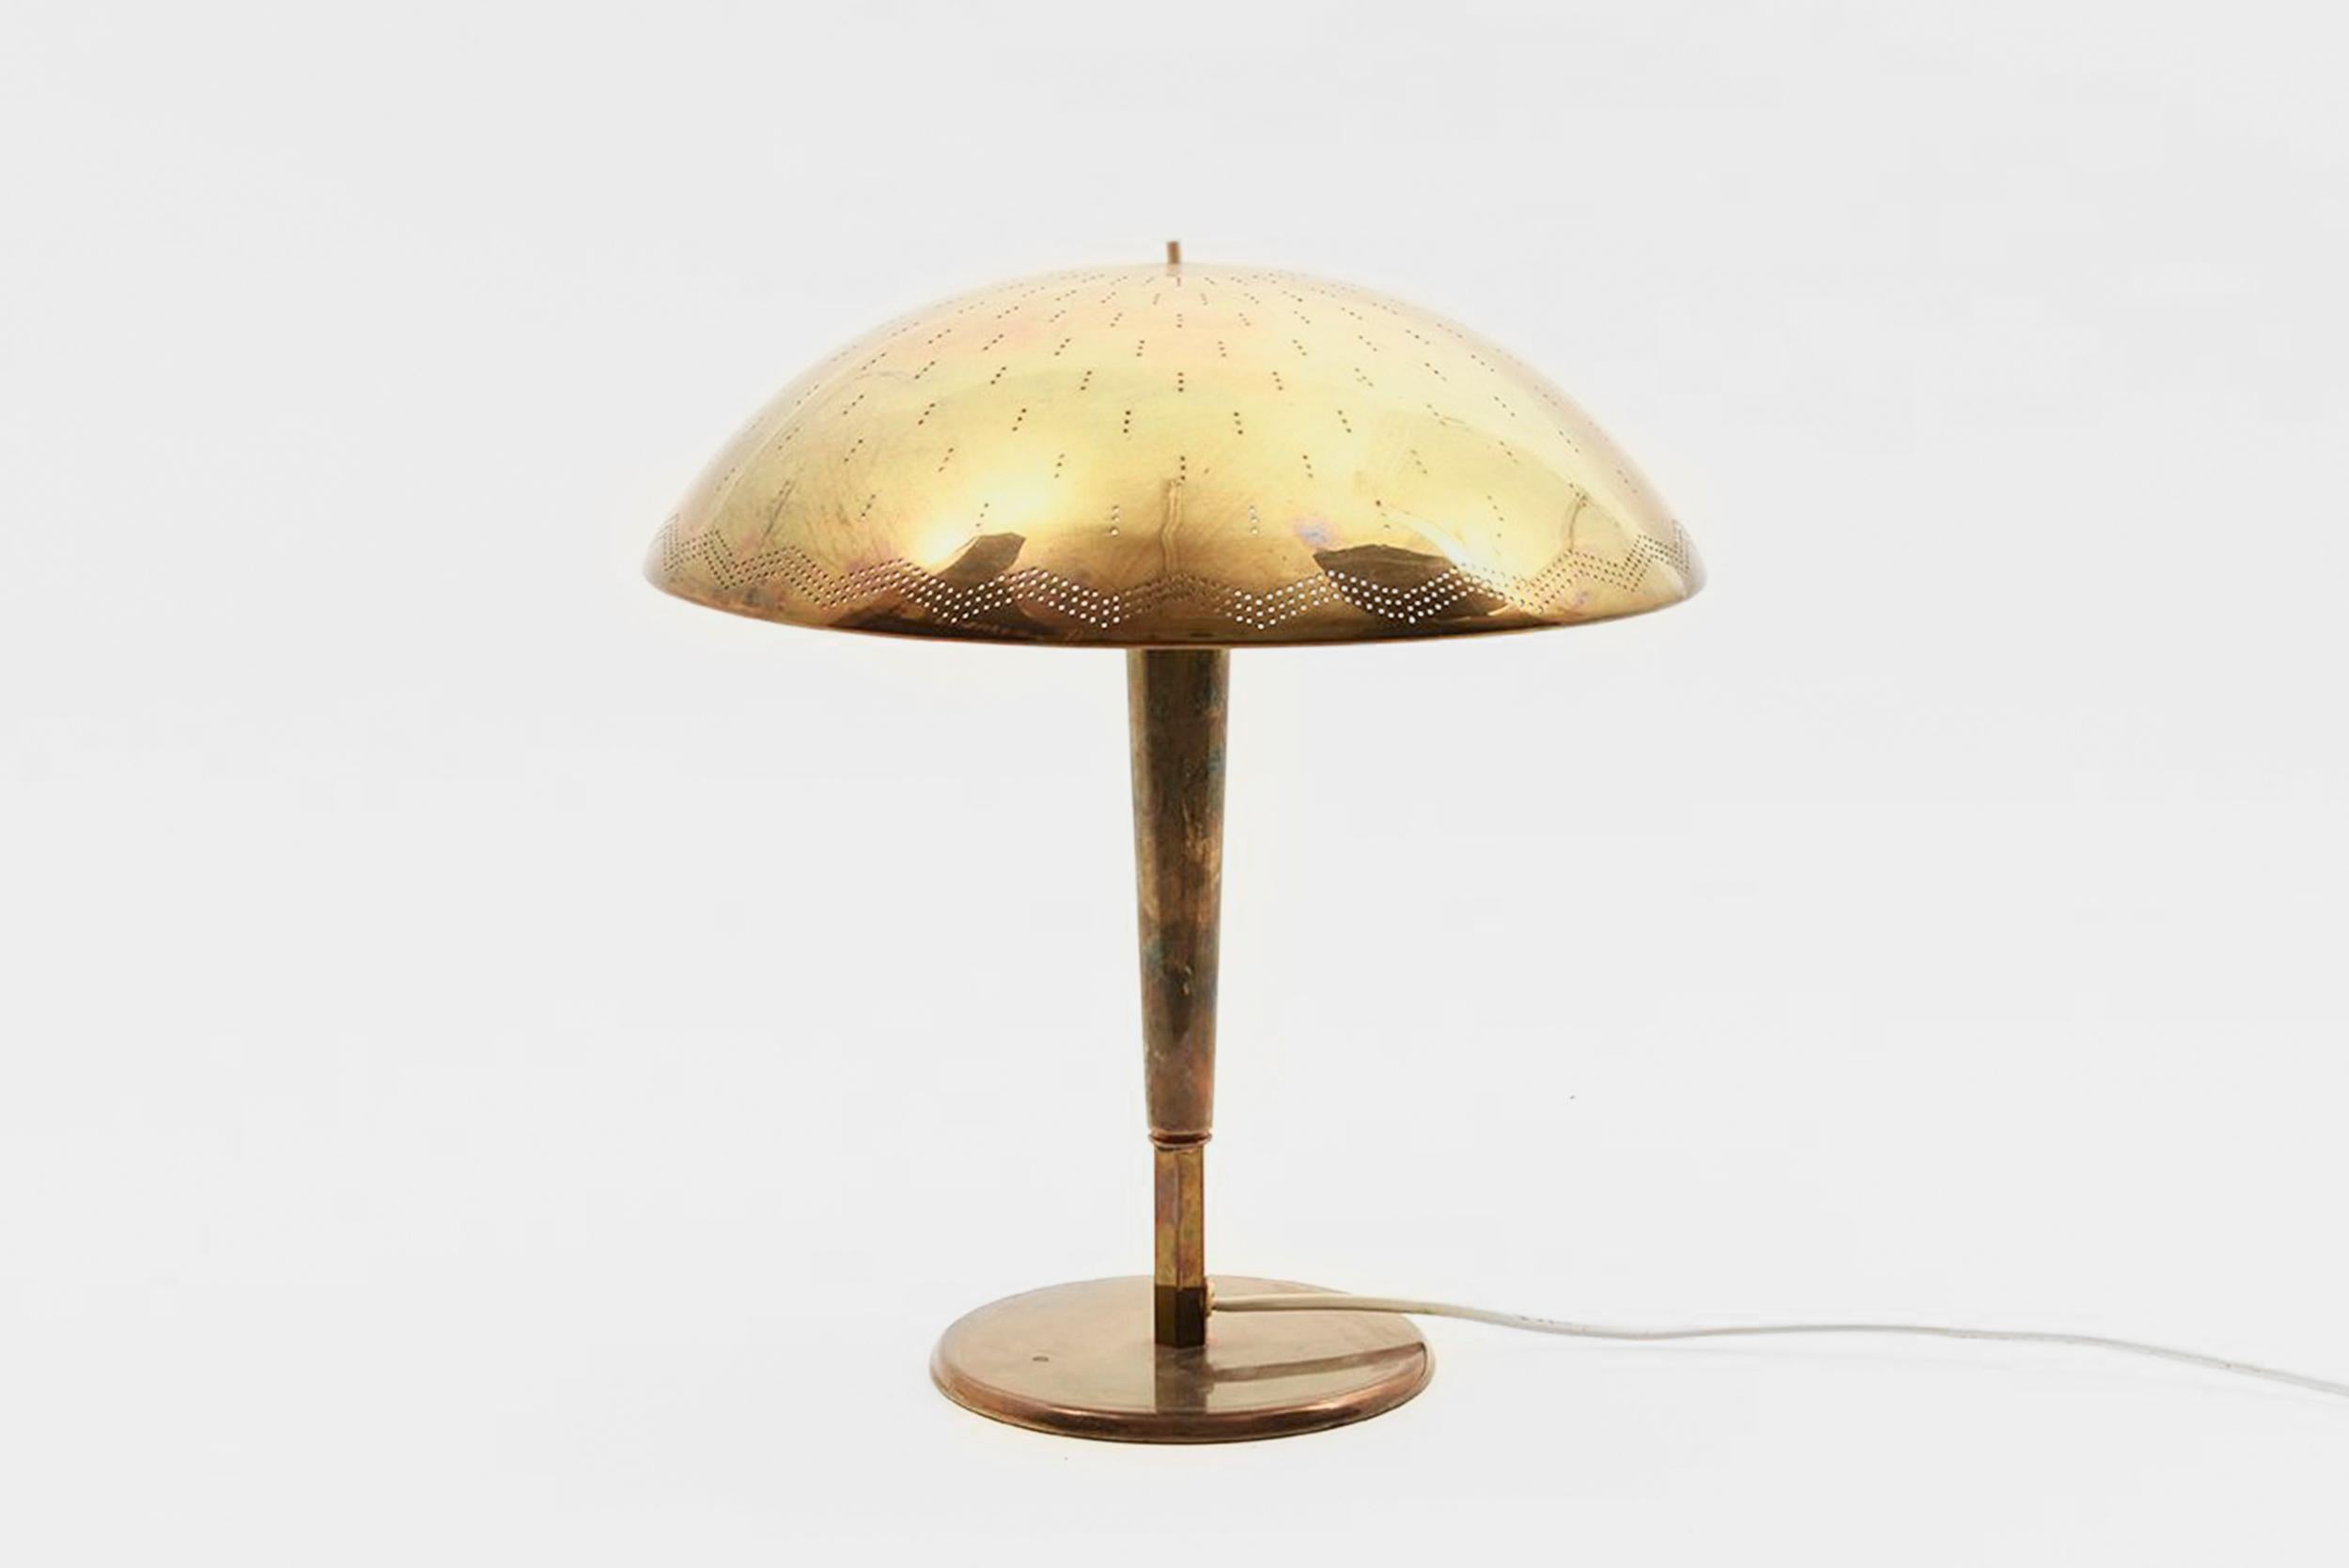 Paavo Tynell
Table lamp model “Umbrella”
Manufactured by Taito Oy
Finland, 1940
Brass
From the archives of Side Gallery, Barcelona 

Measurements
32 cm x 41 H cm
12.5 in x 16 H in

Bio
Paavo Tynell (1890-1973) was an industrial designer,